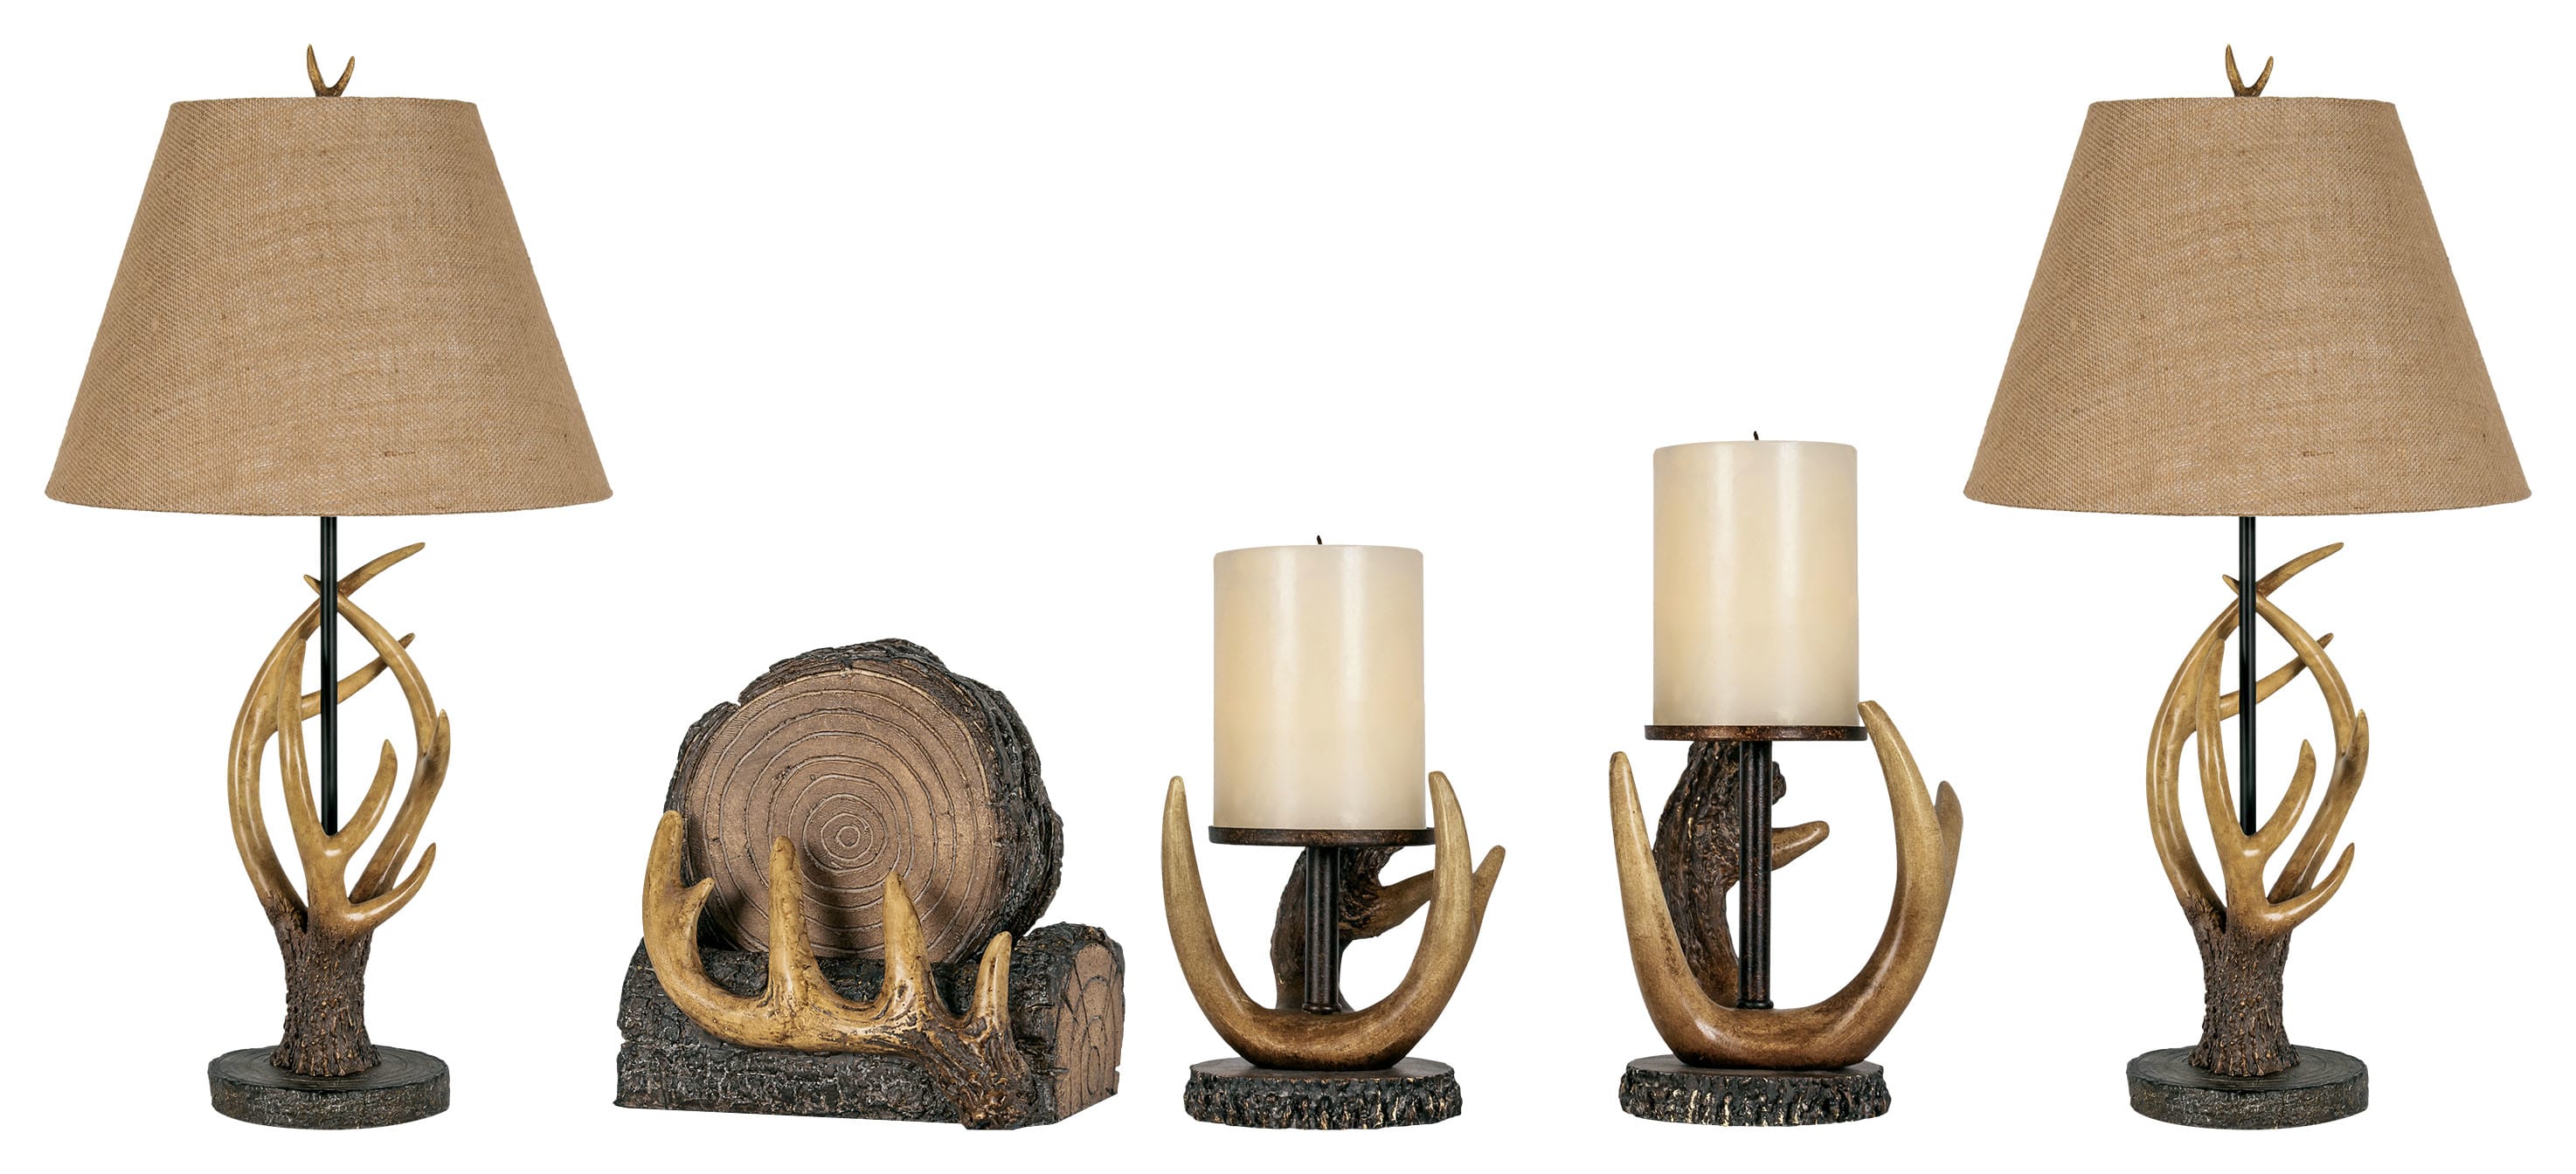 White River™ Antler Décor 5-Piece Table Lamps and Accessories Set